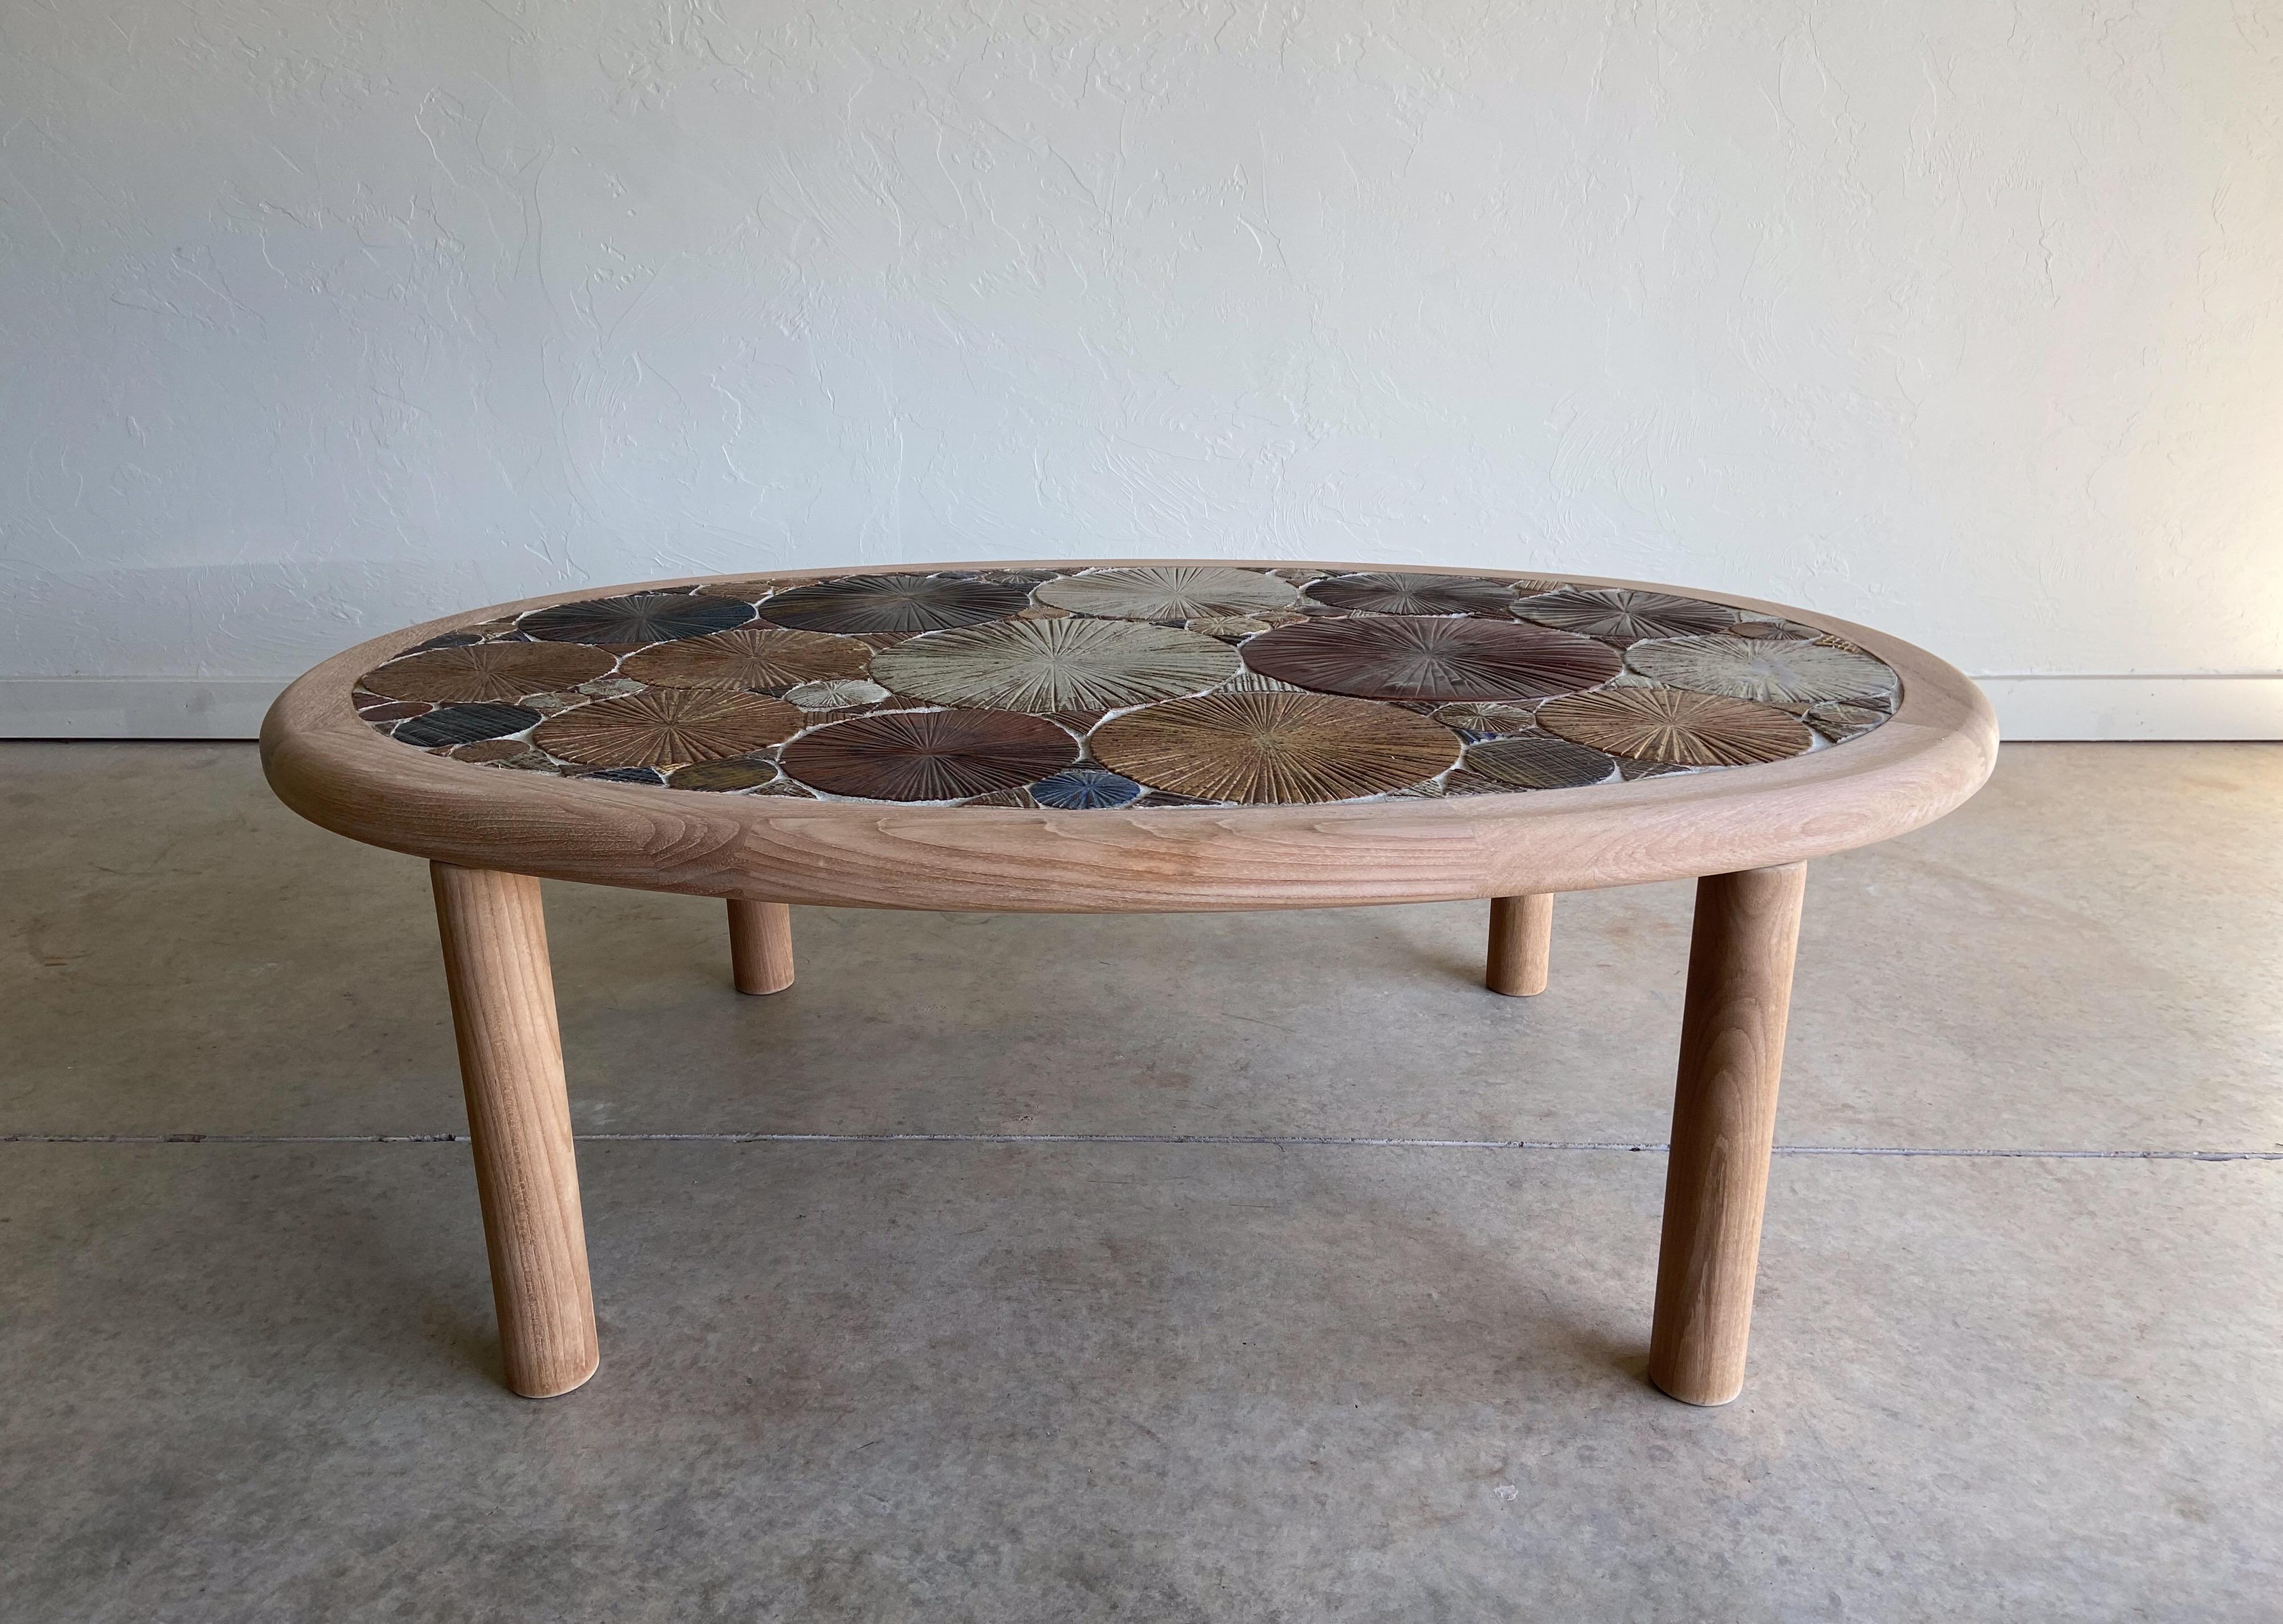 Hand-Crafted Tue Poulsen Danish Modern Teak and Handmade Ceramic Coffee Table, Artist Signed